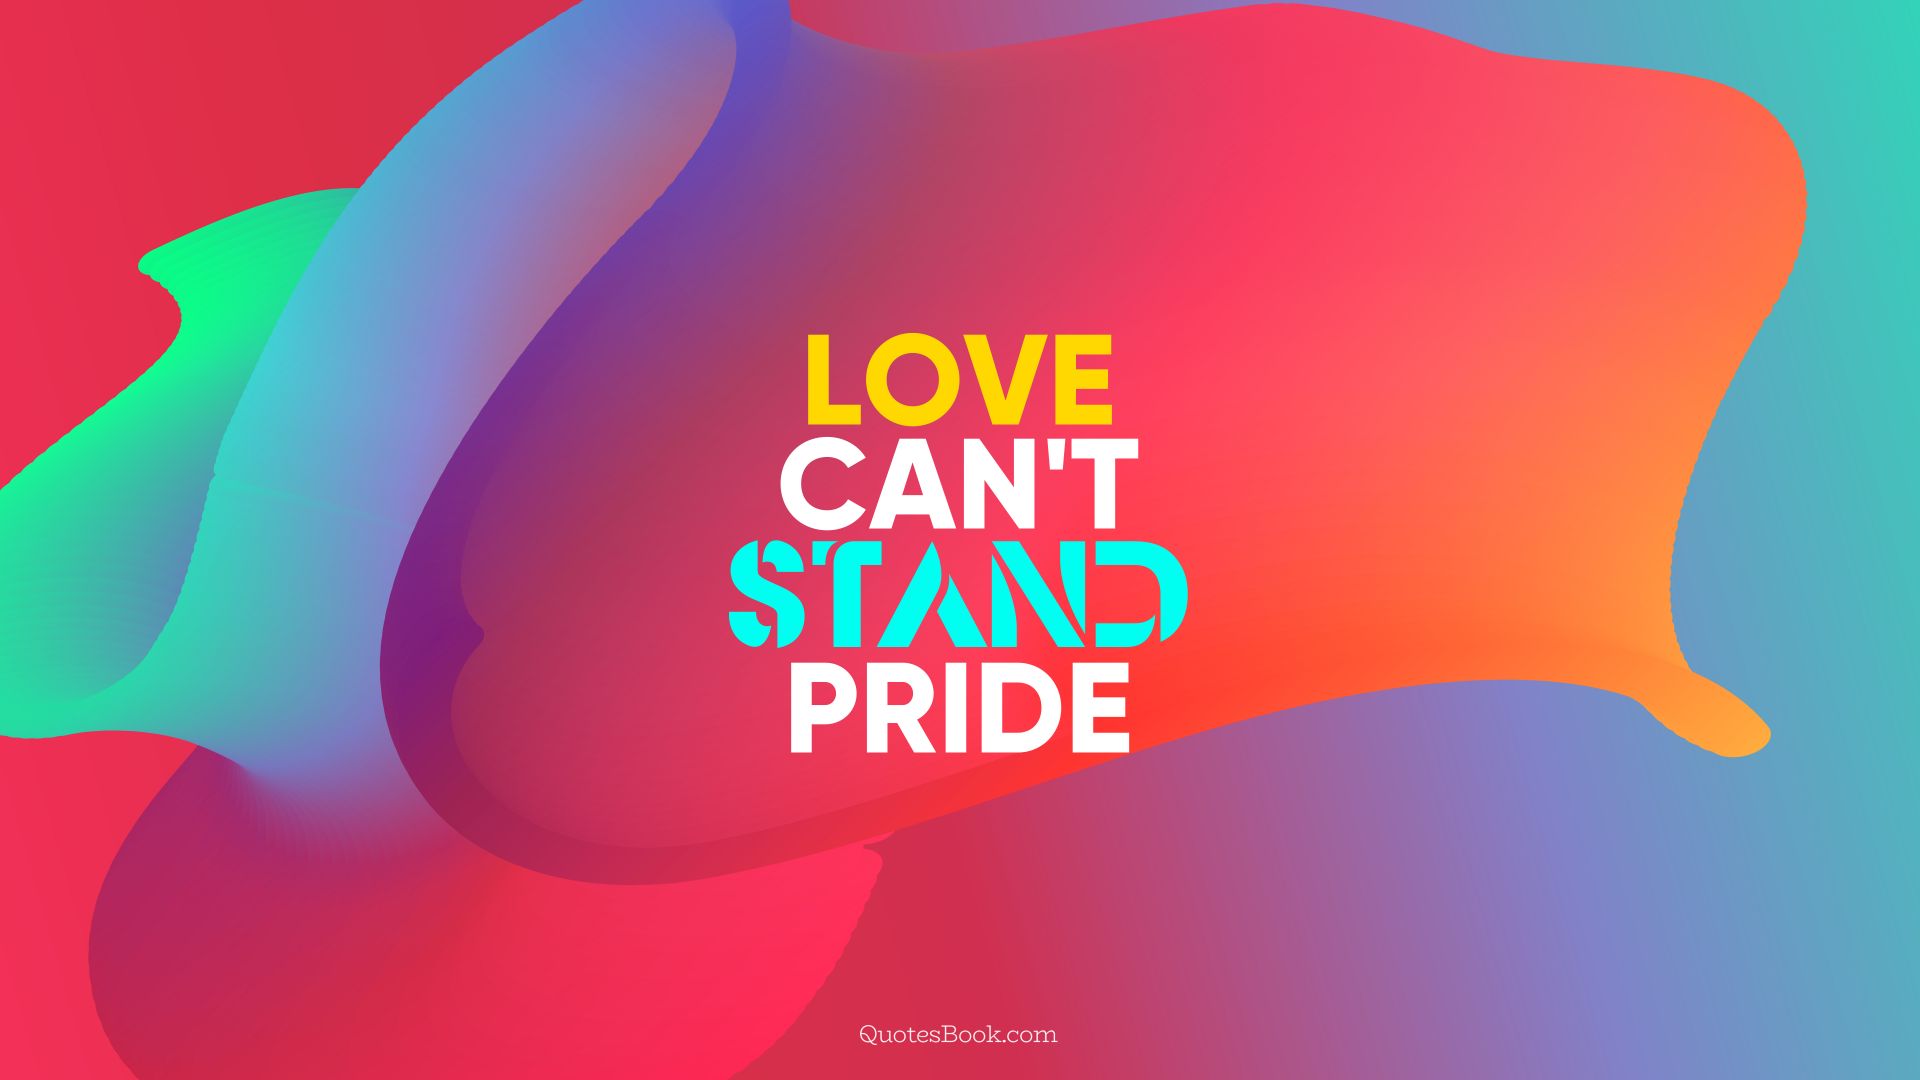 Love can't stand pride. - Quote by QuotesBook